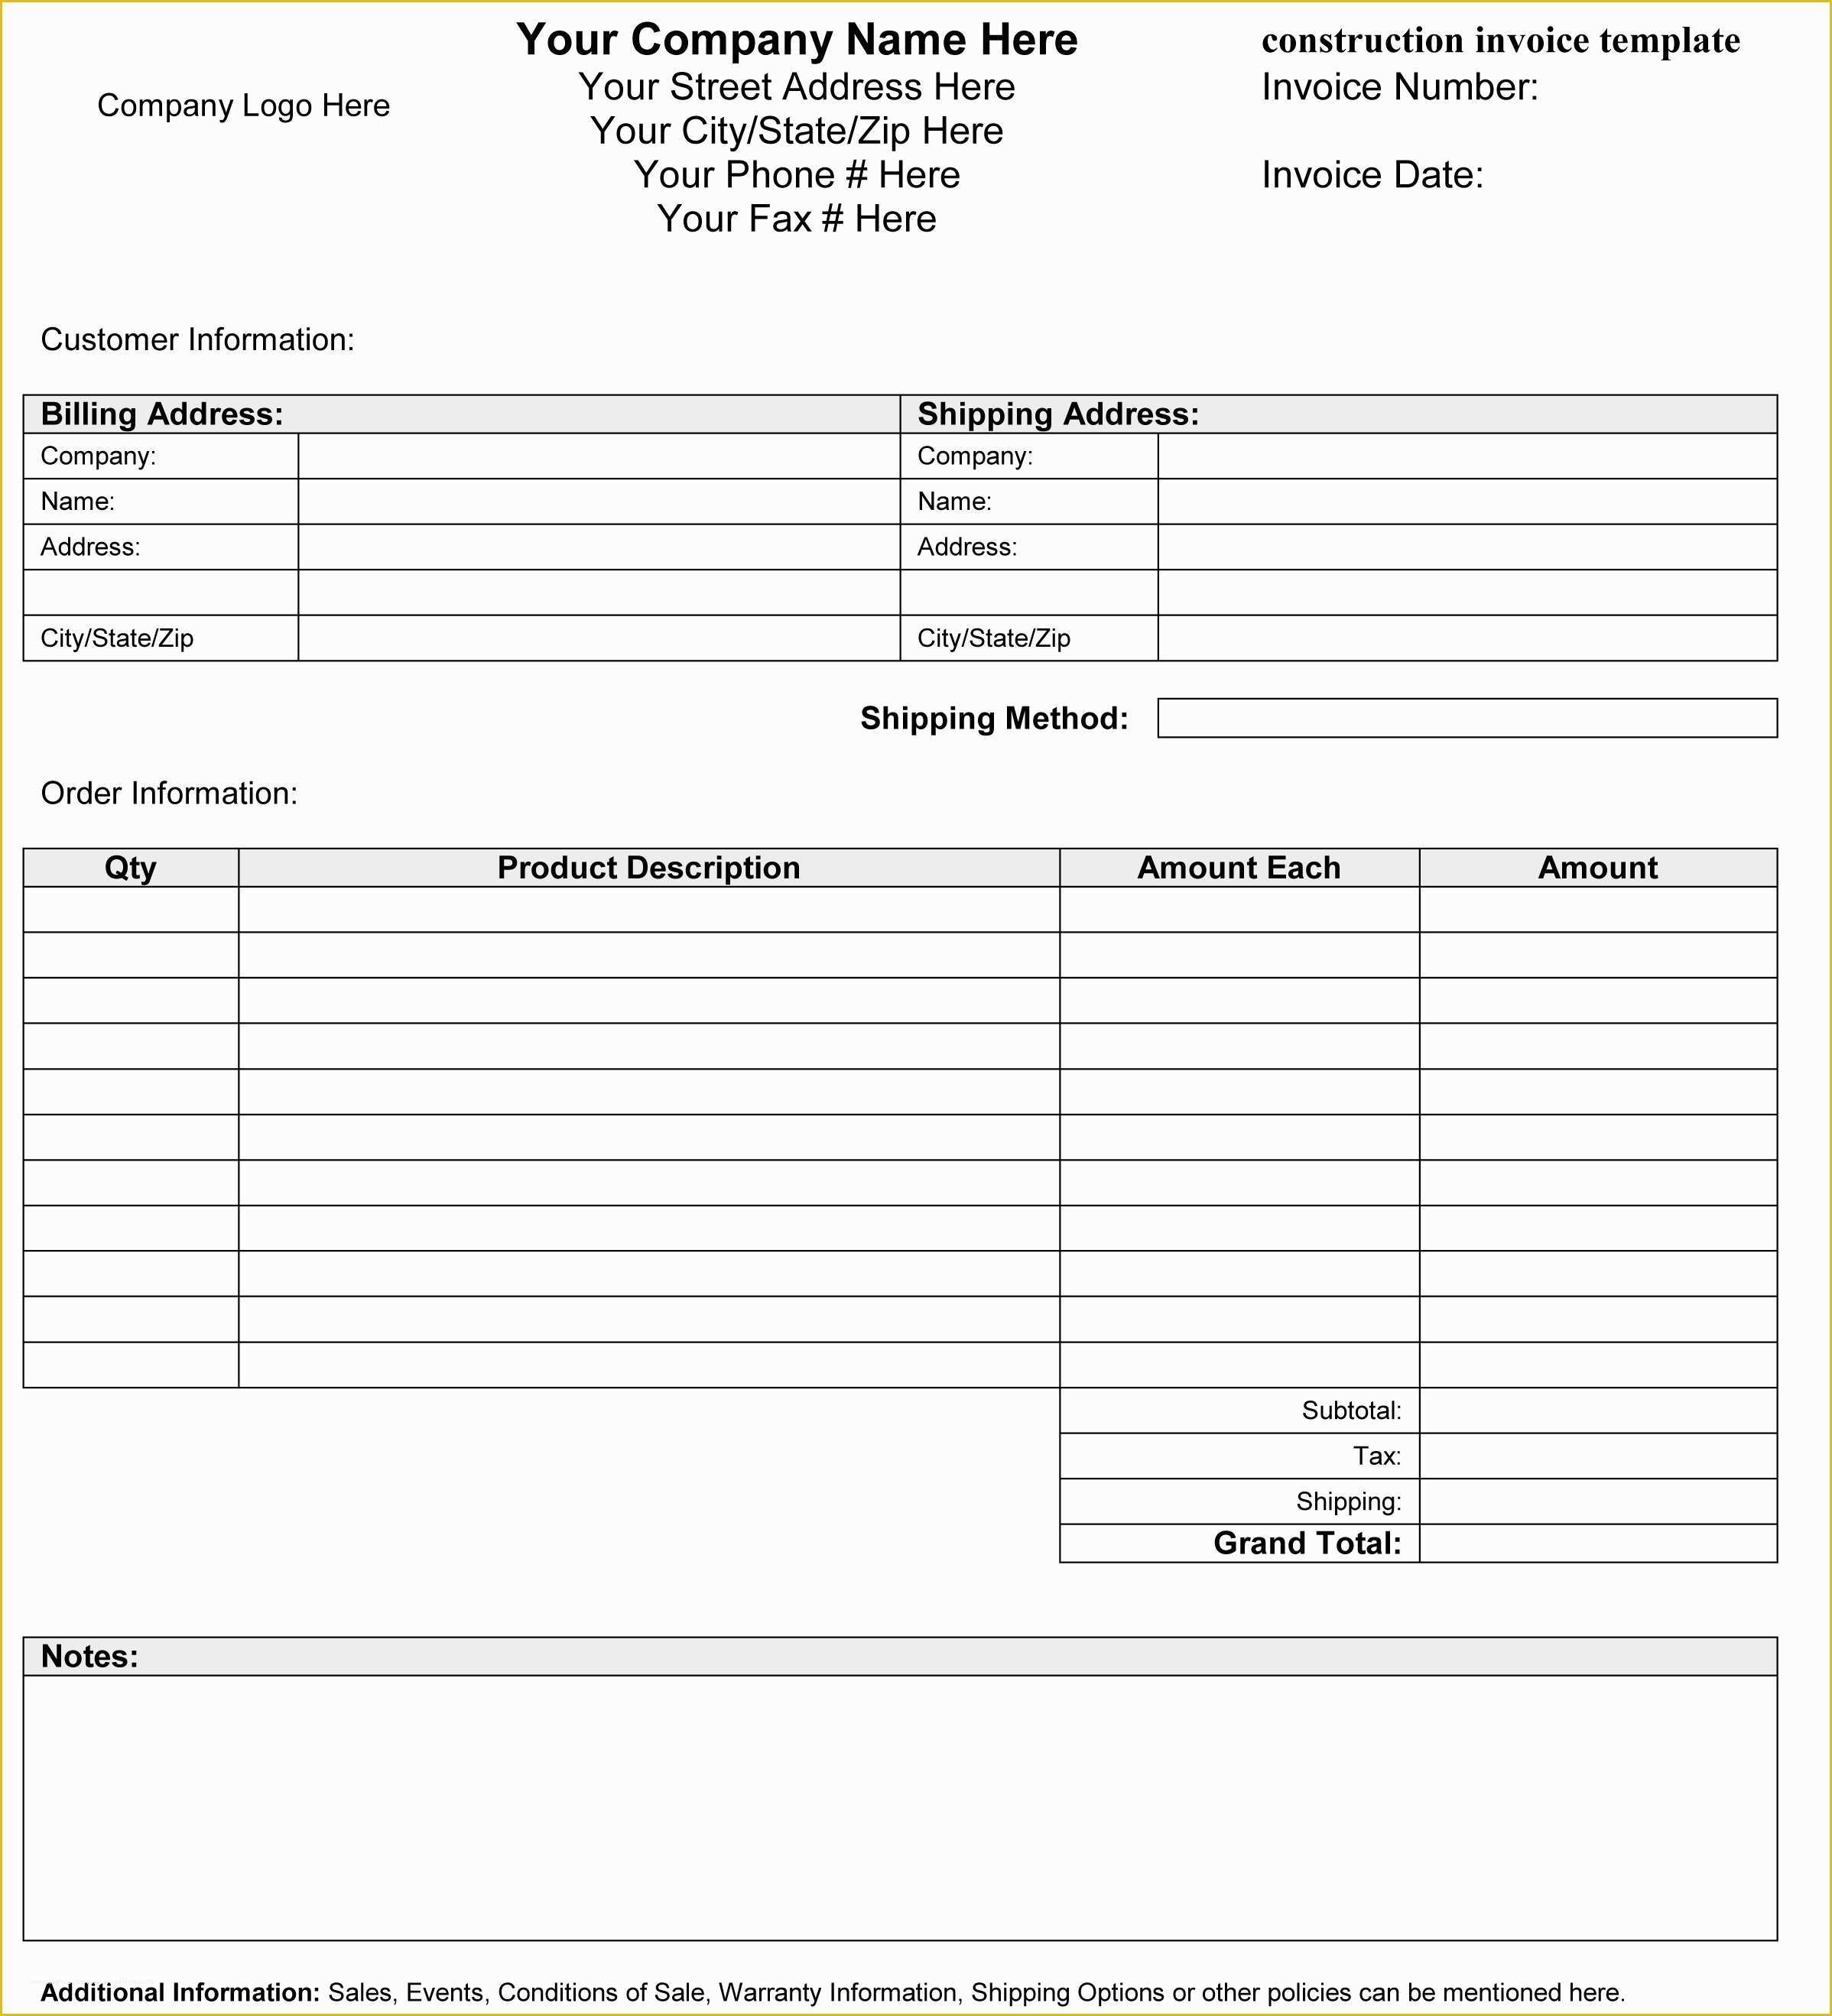 Construction Invoice Template Excel Free Of Construction Invoice Template